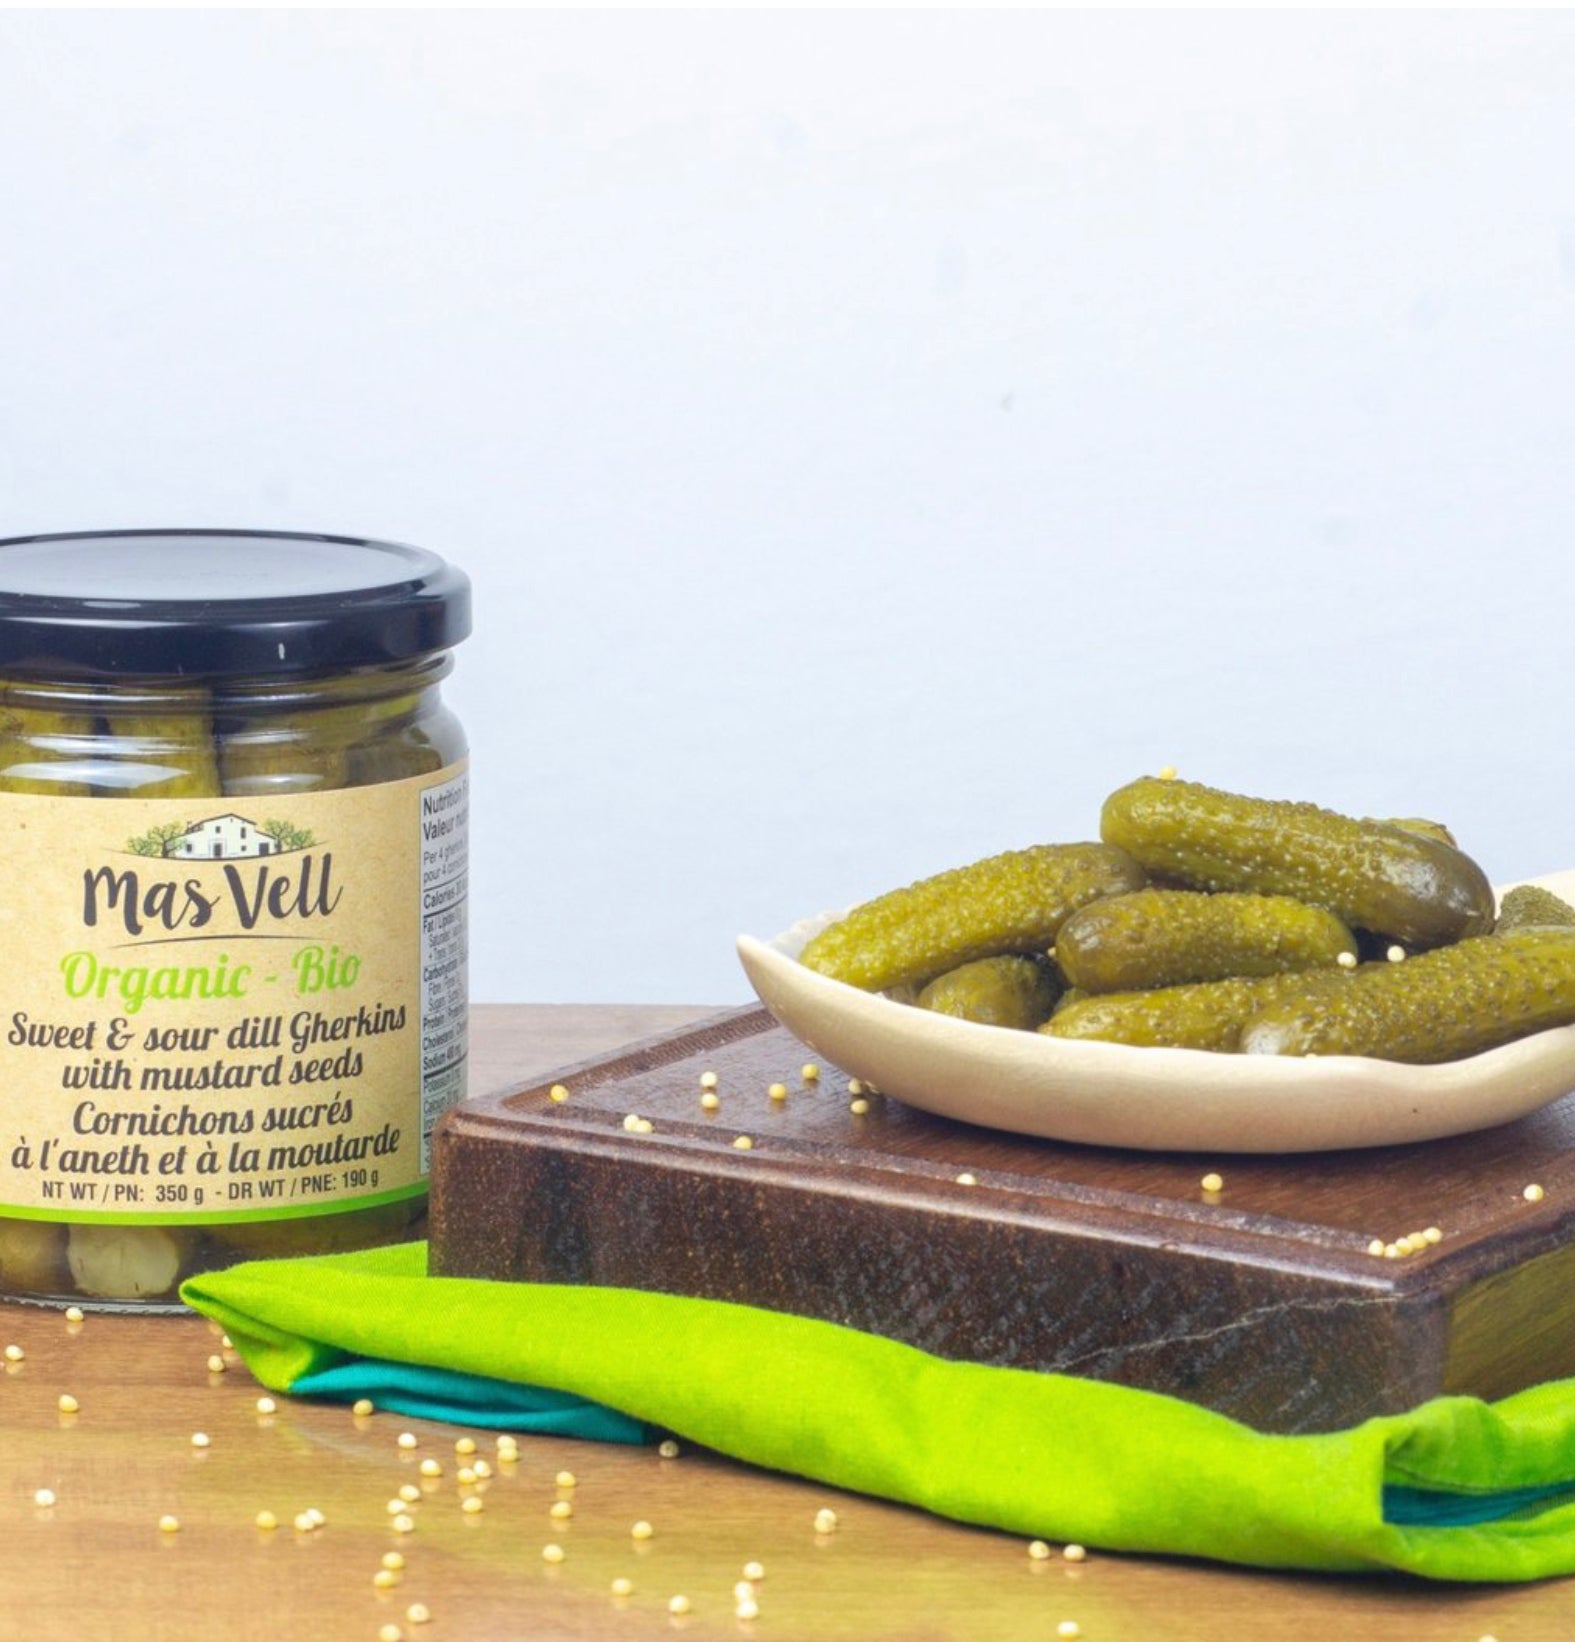 Mas Vell organic sweet and sour gherkins with mustard seeds, 370 mL